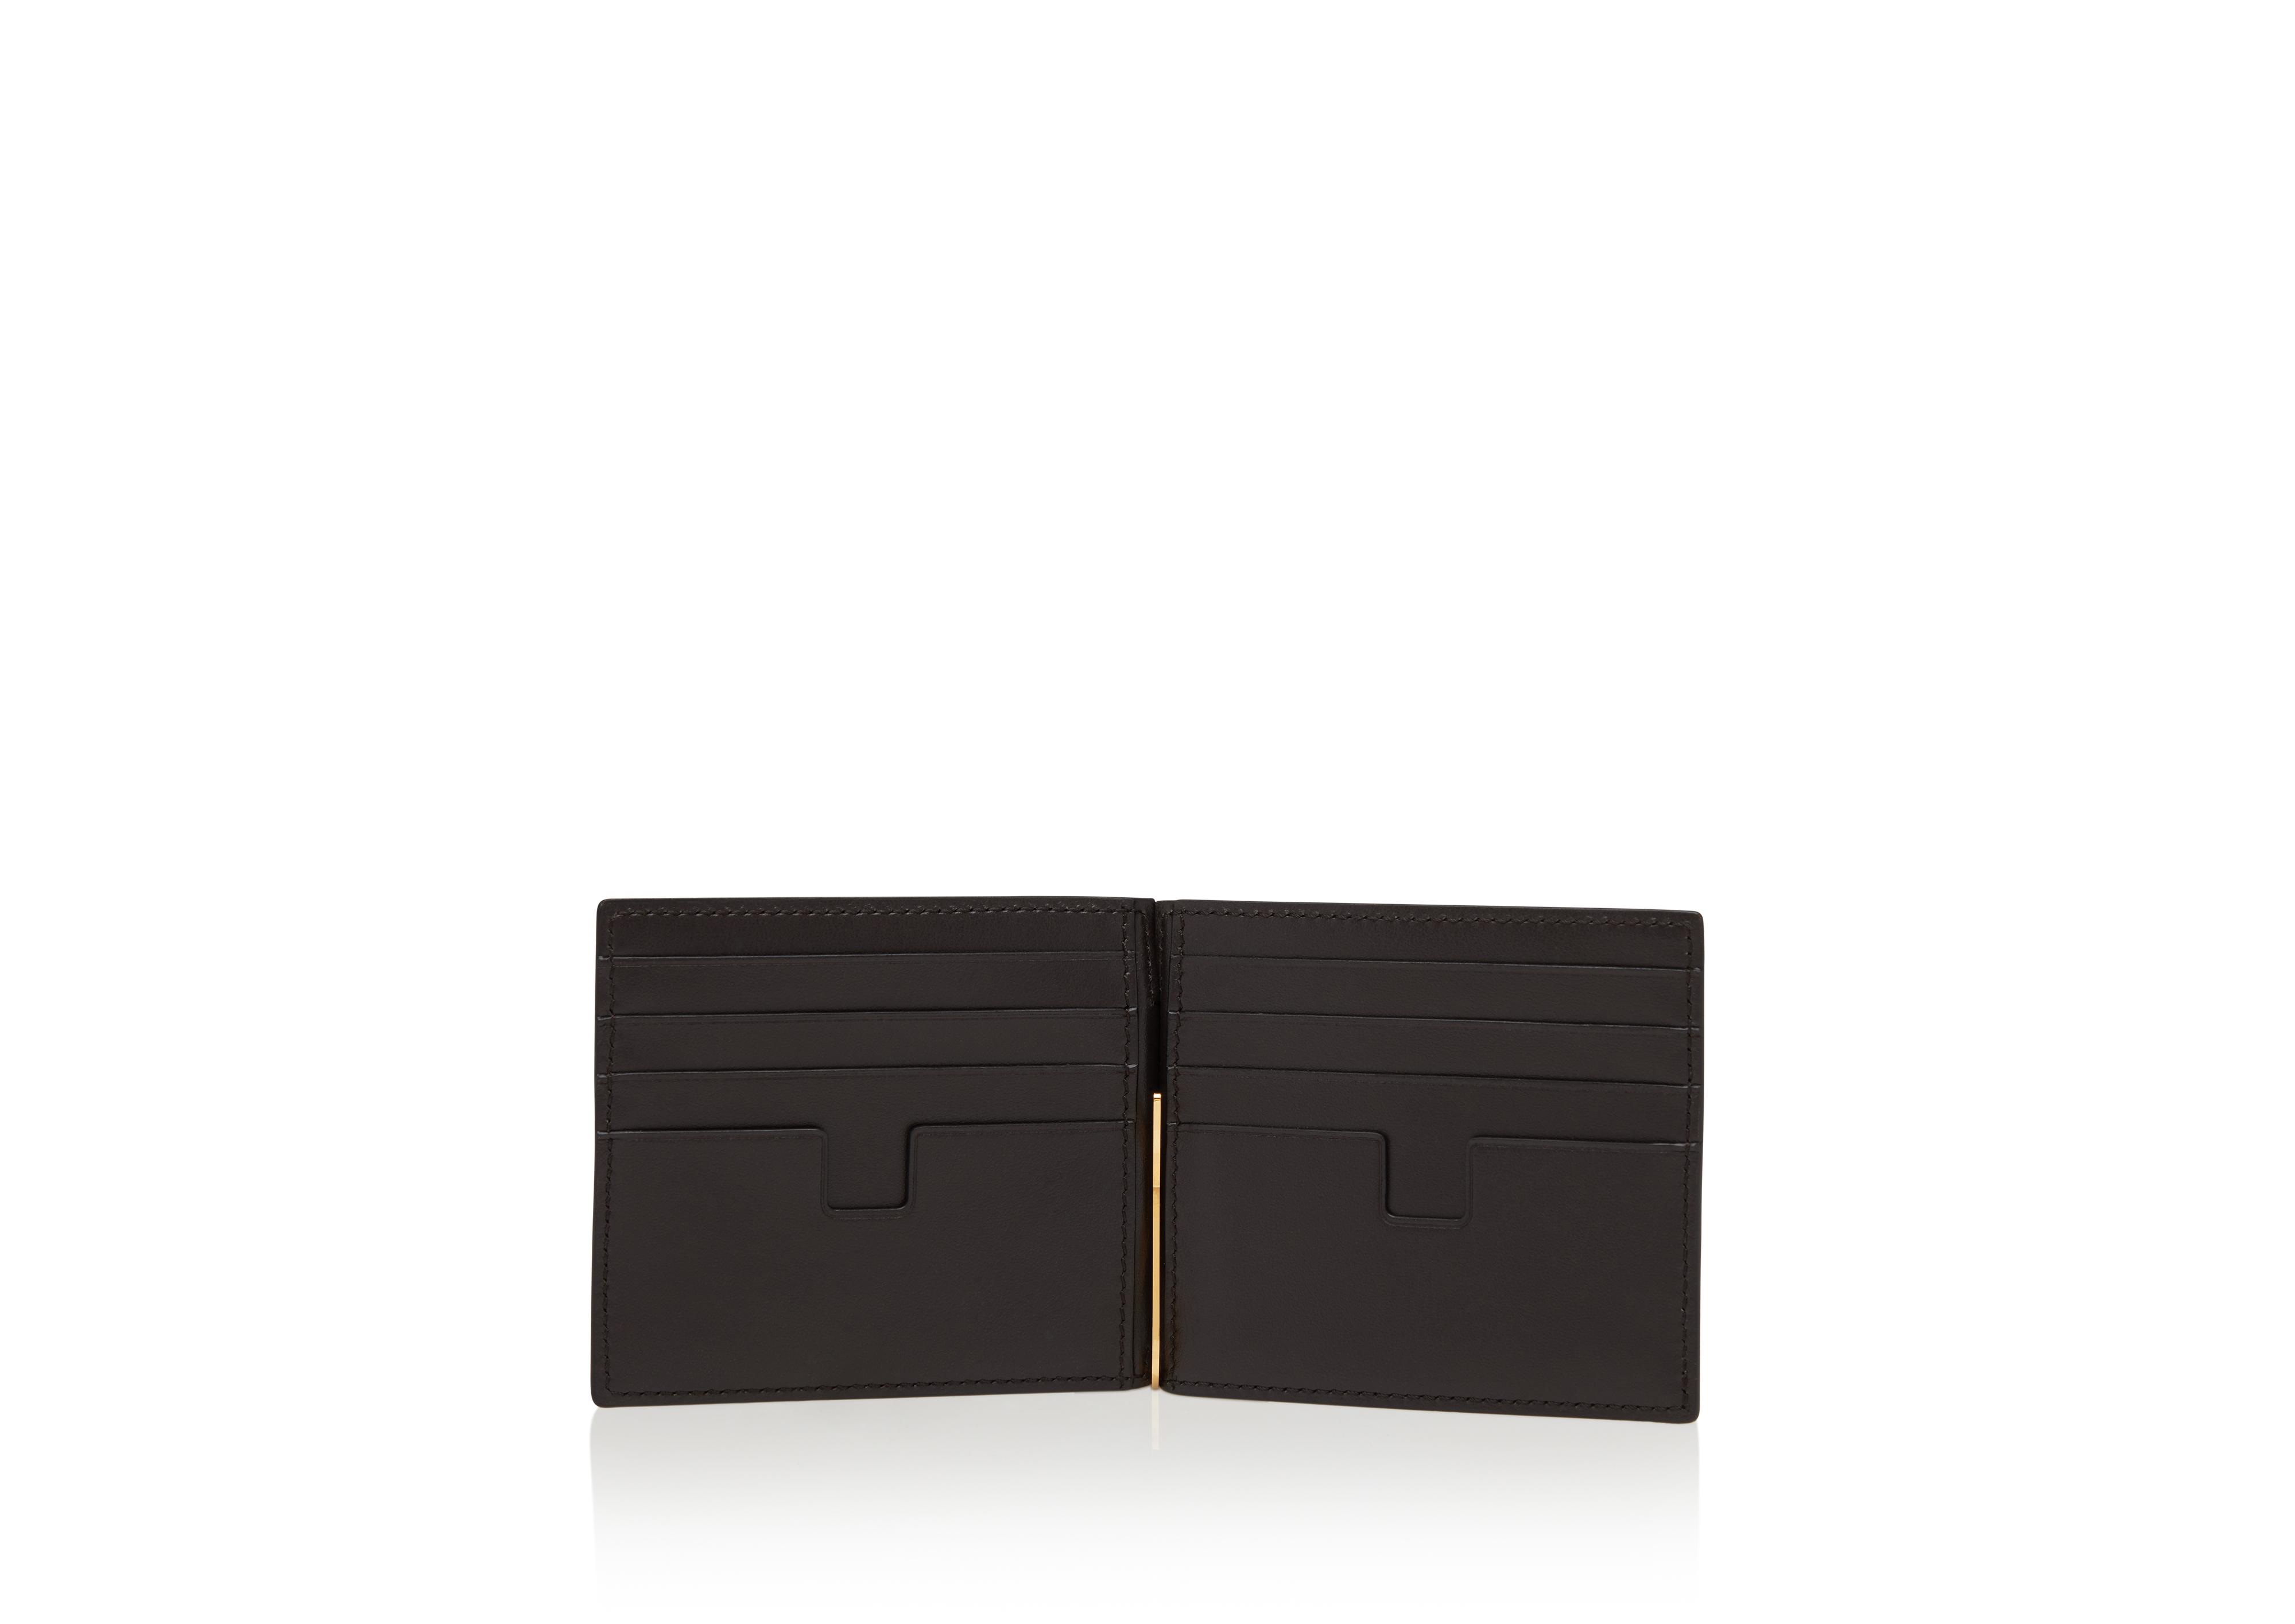 Tom Ford Brown Lizard Money Clip Wallet Tom Ford